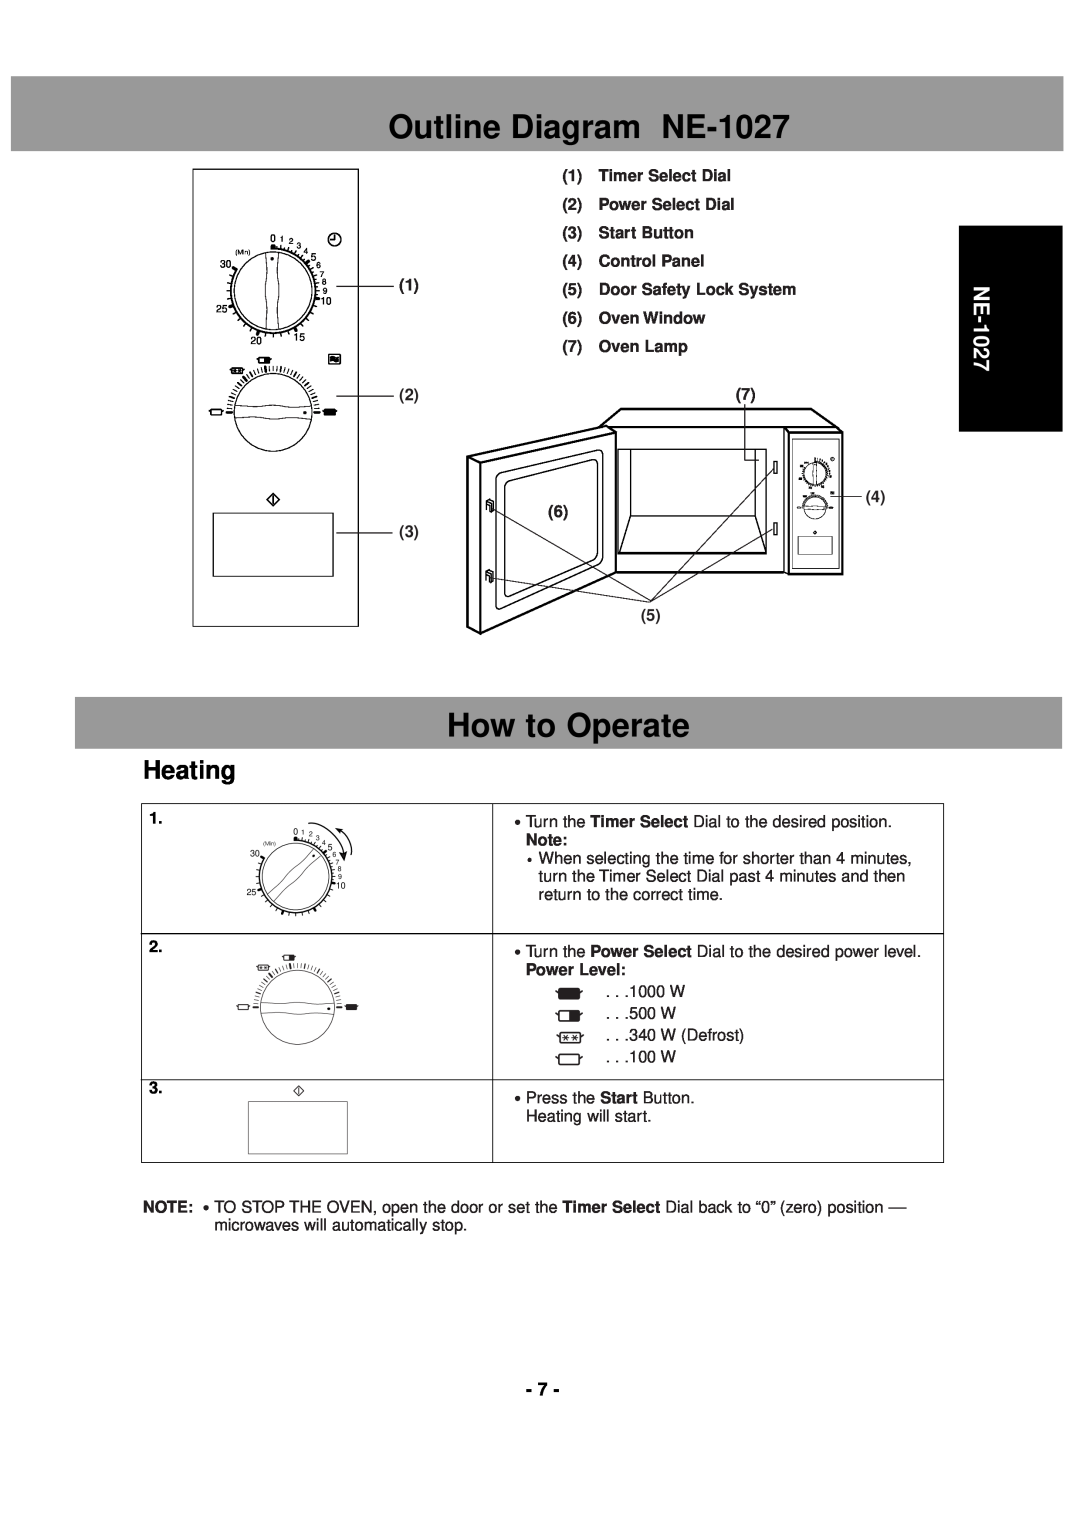 LG Electronics NE-1037 Outline Diagram, NE-1027, How to Operate, Heating, Timer Select Dial, Power Select Dial, Oven Lamp 